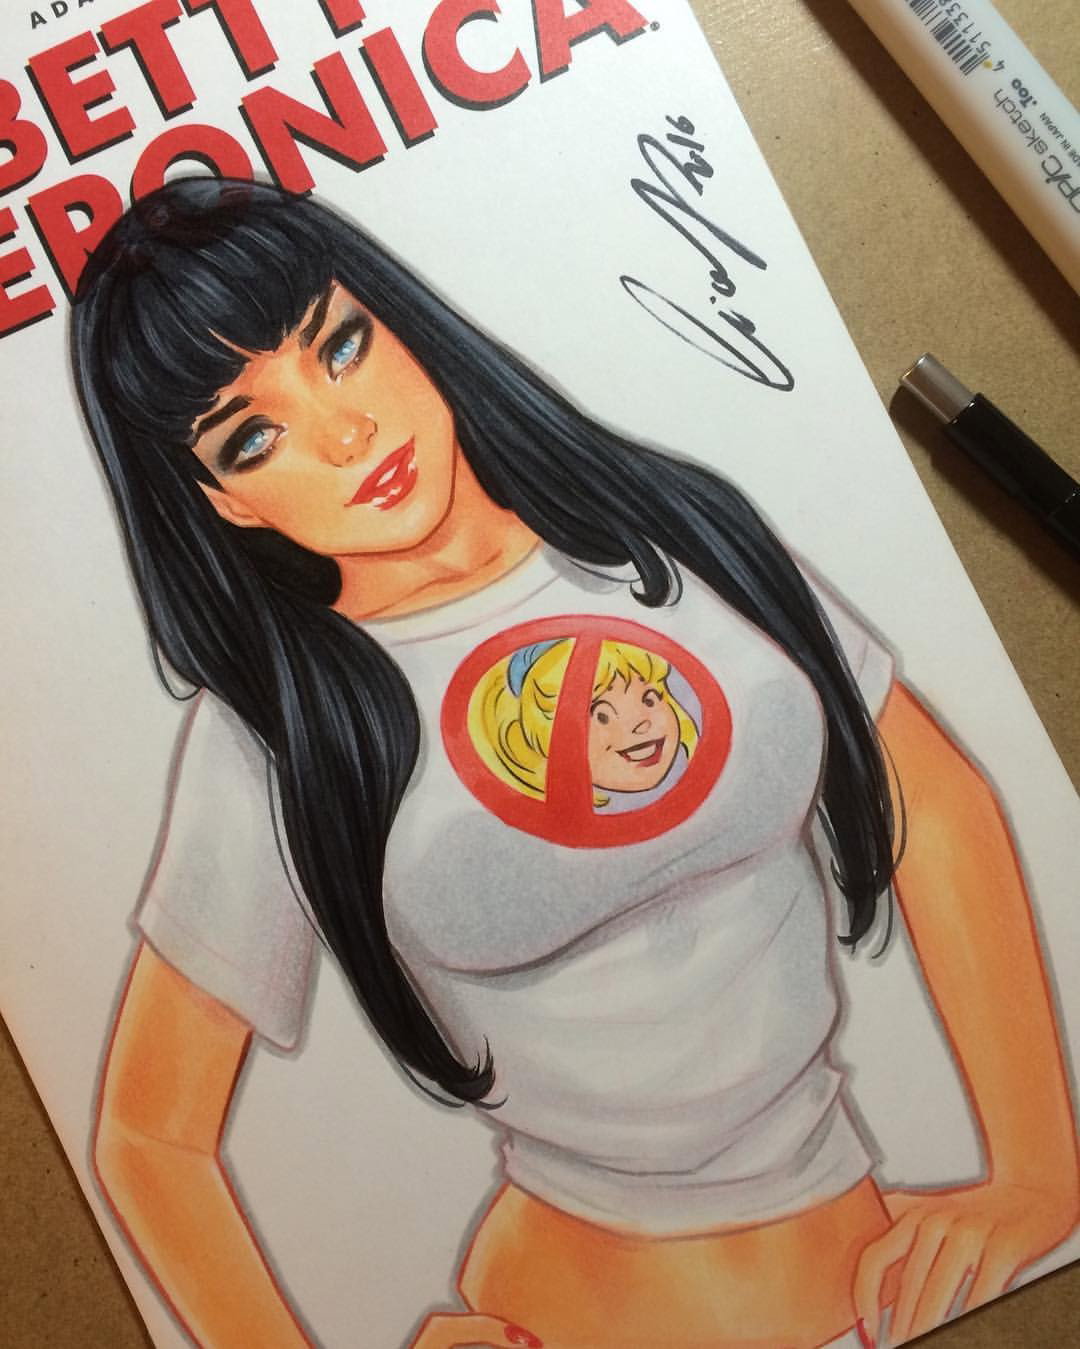 Photo by Justanotherguy with the username @Justanotherguy79,  October 18, 2016 at 3:46 AM and the text says 'eliaschatzoudis:

#bettyandveronica #archiecomics #chatgr #eliaschatzoudis #copicmarkers'